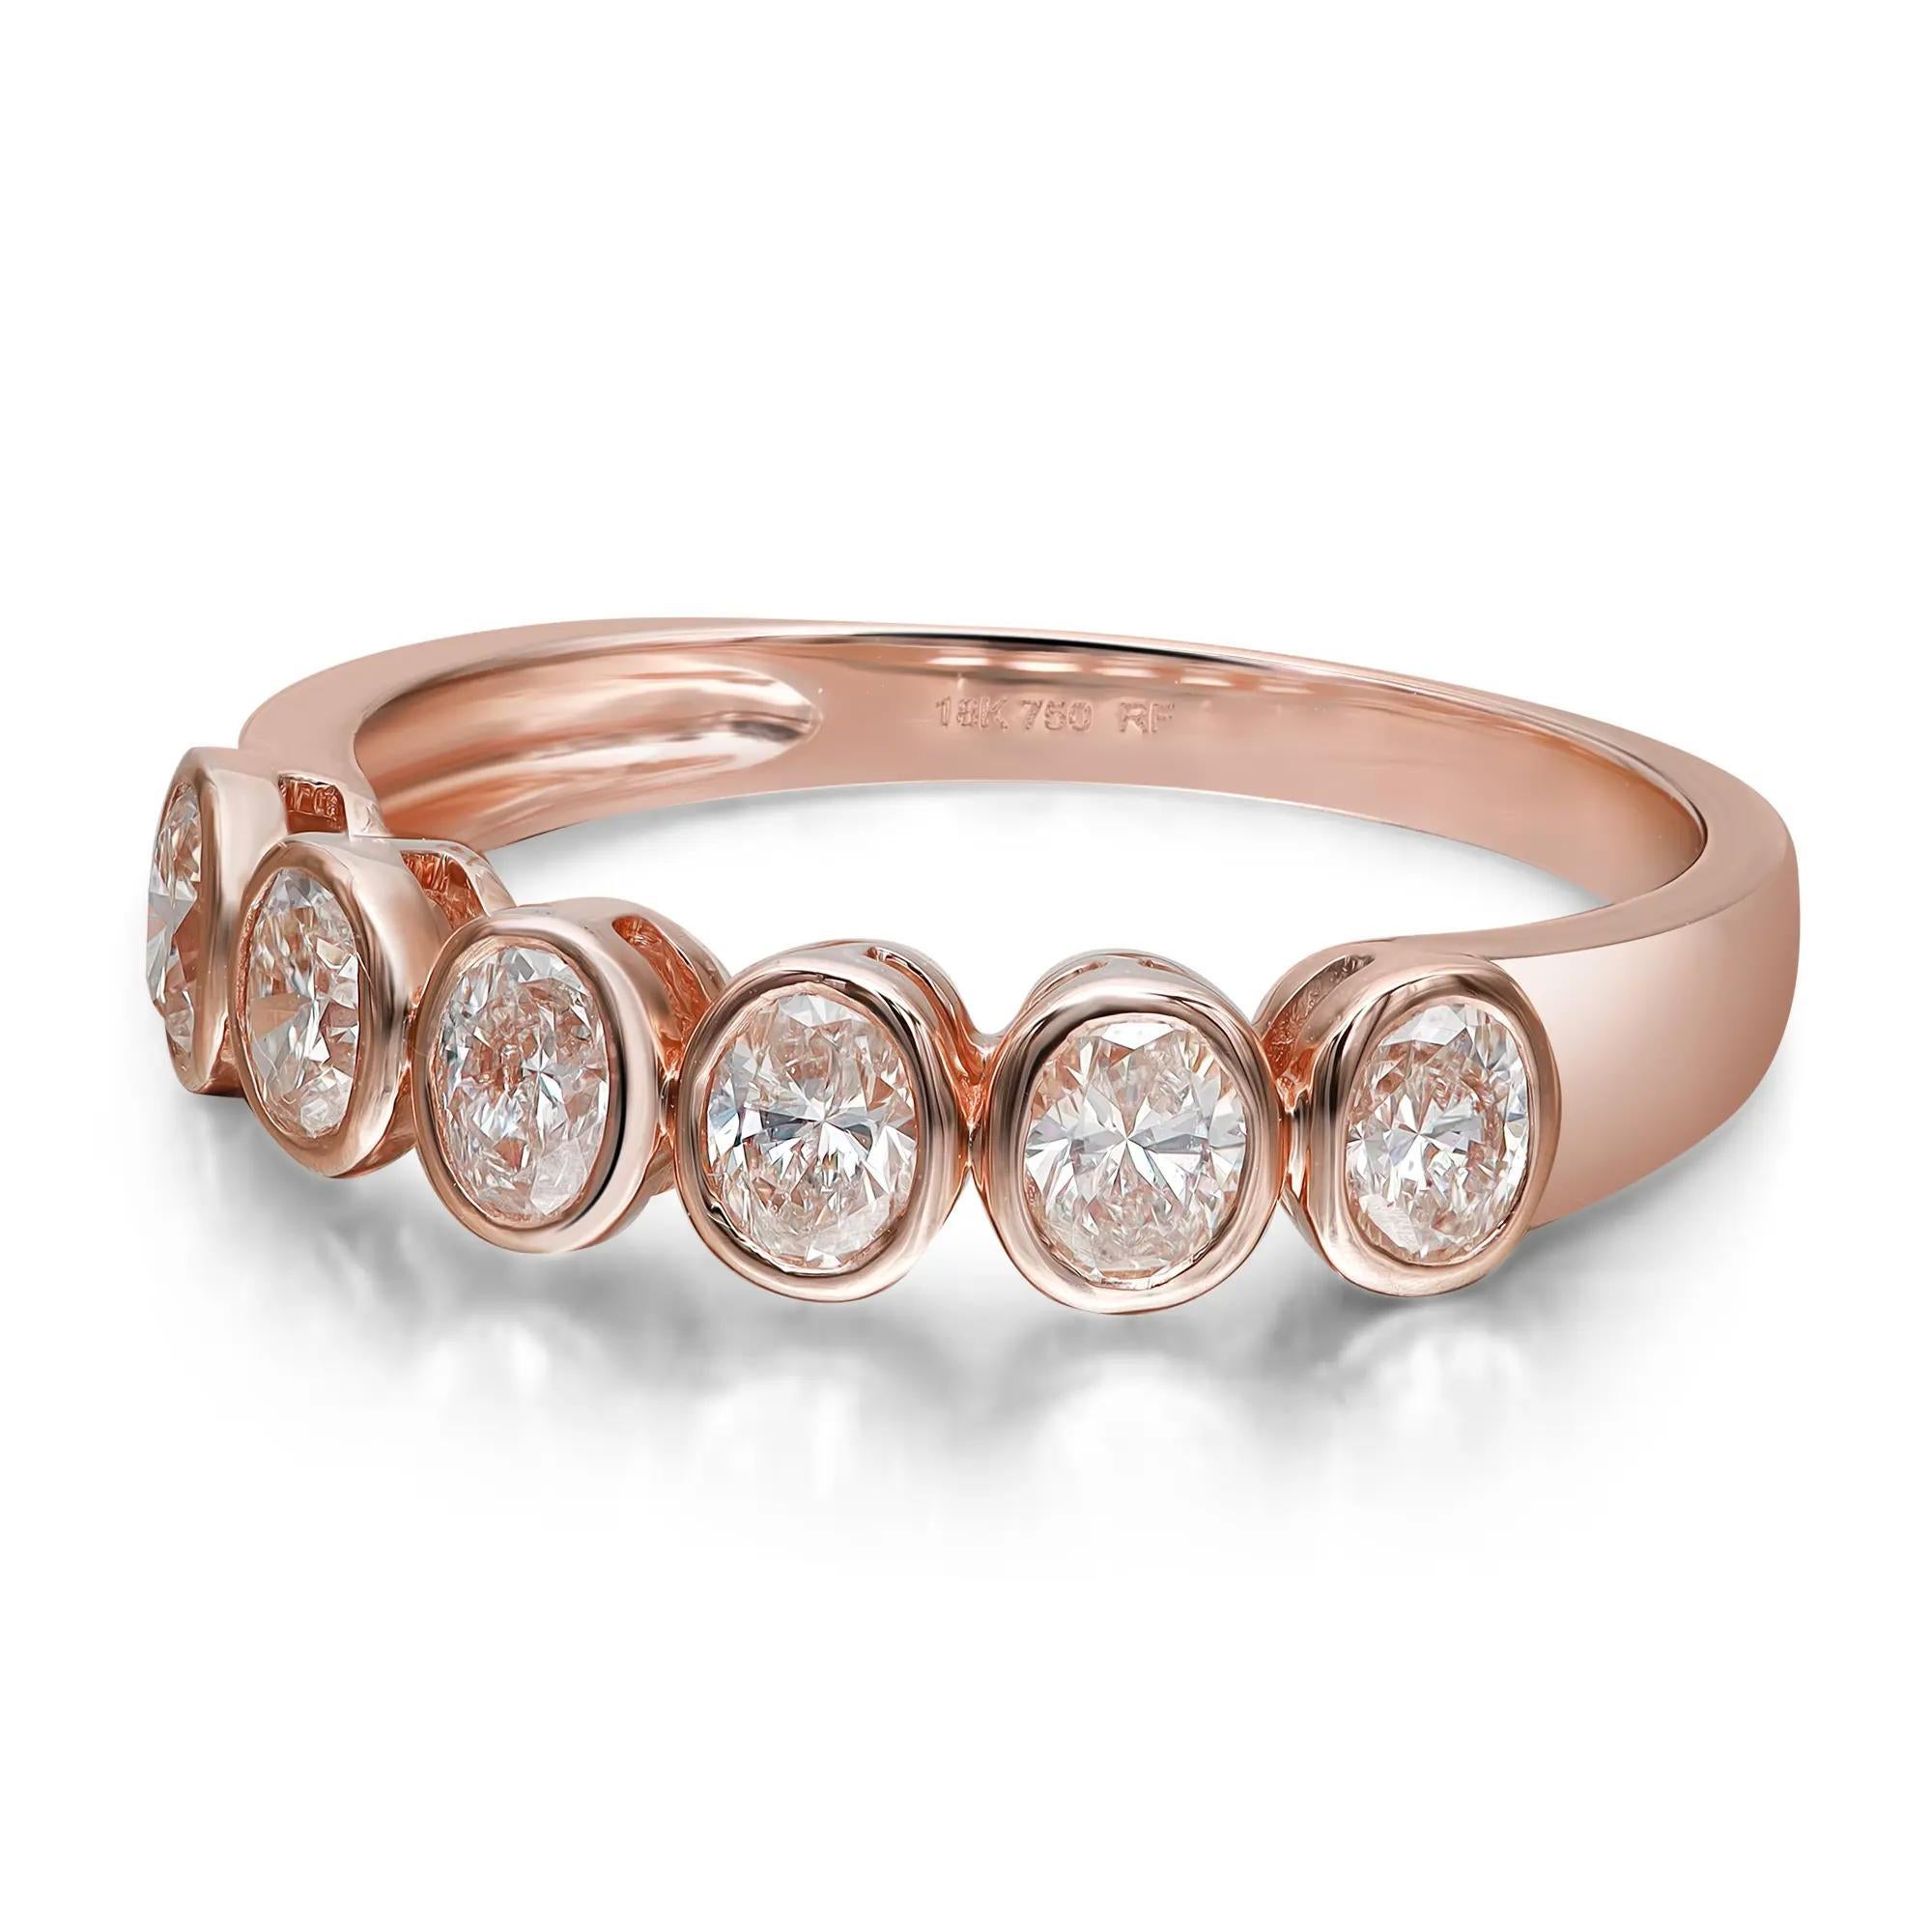 Celebrate everlasting love with this enchanting eternity band ring. Crafted in high polished 18K rose gold. Showcasing 6 bezel set oval cut dazzling diamonds weighing 0.85 carat. Diamond quality: color G-H and clarity VS-SI. Ring size: 6.75. Width: